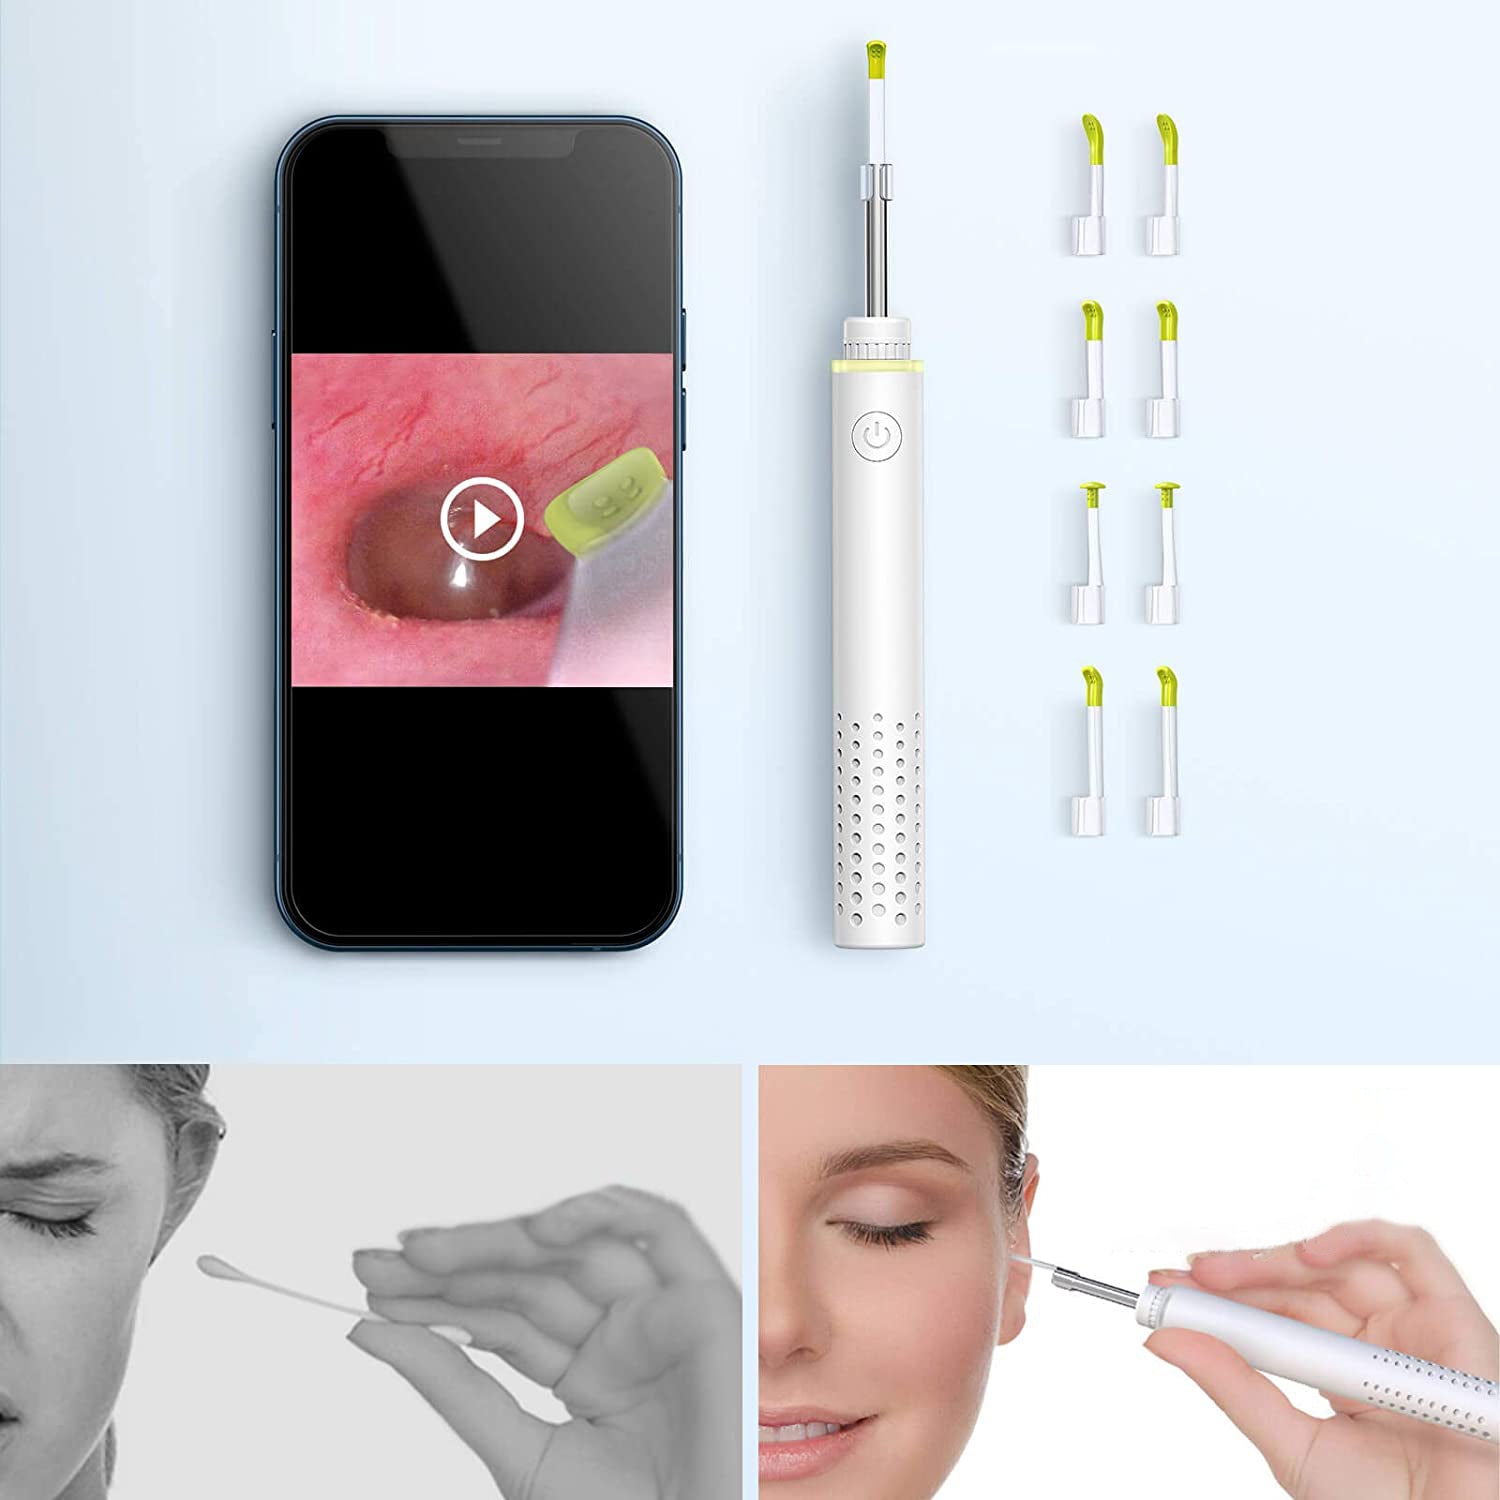 Visible Visual ear scoop picker Wax Removal Tool Cleaner WiFi With Camera  Set US